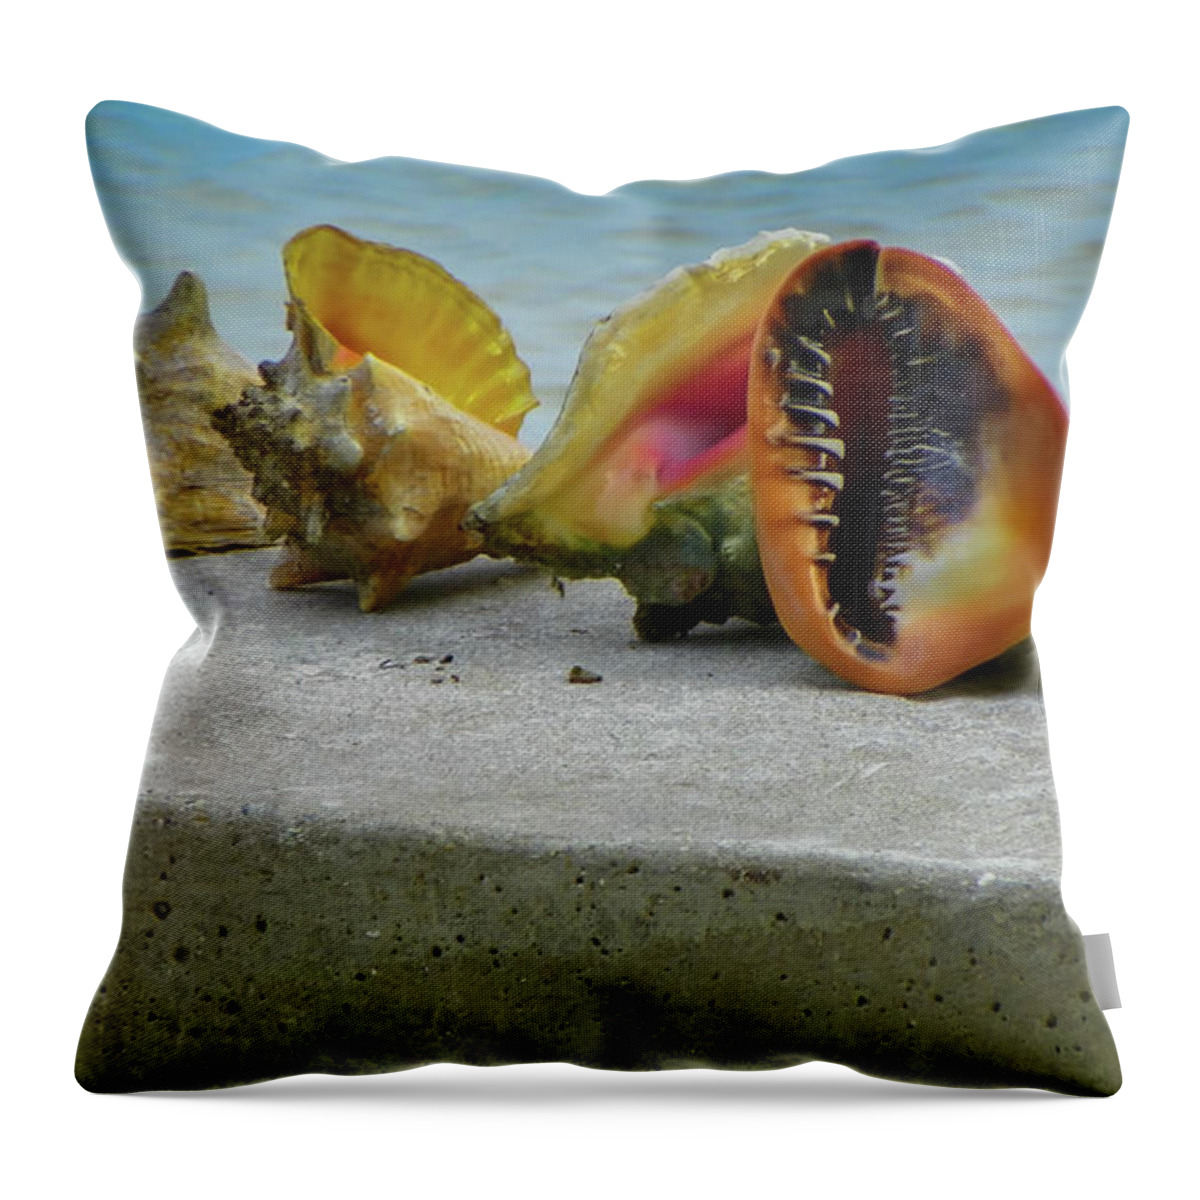 Conch Shells Throw Pillow featuring the photograph Caribbean Charisma by Karen Wiles